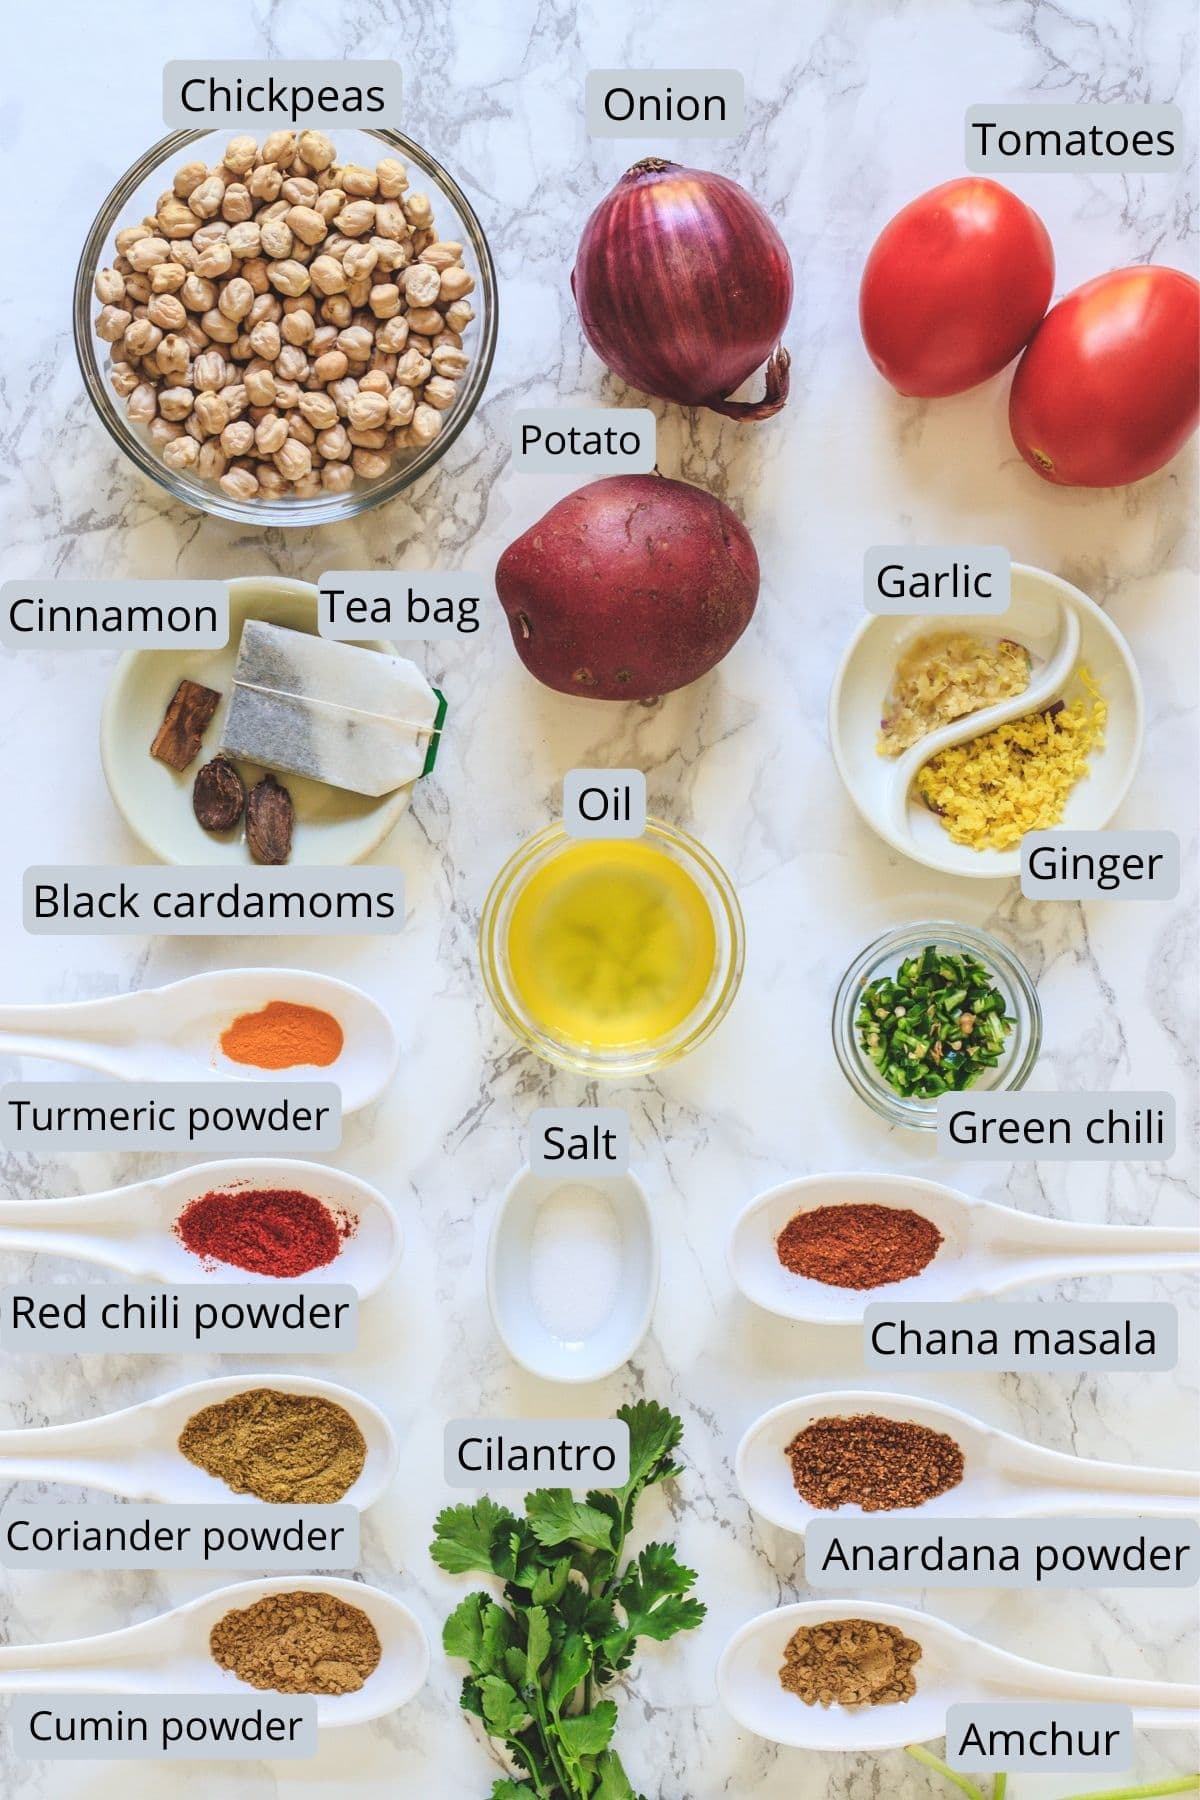 Ingredients used in aloo chana includes chickpeas, potato, onion, tomato, ginger, garlic, chili, cilantro, oil and spices.